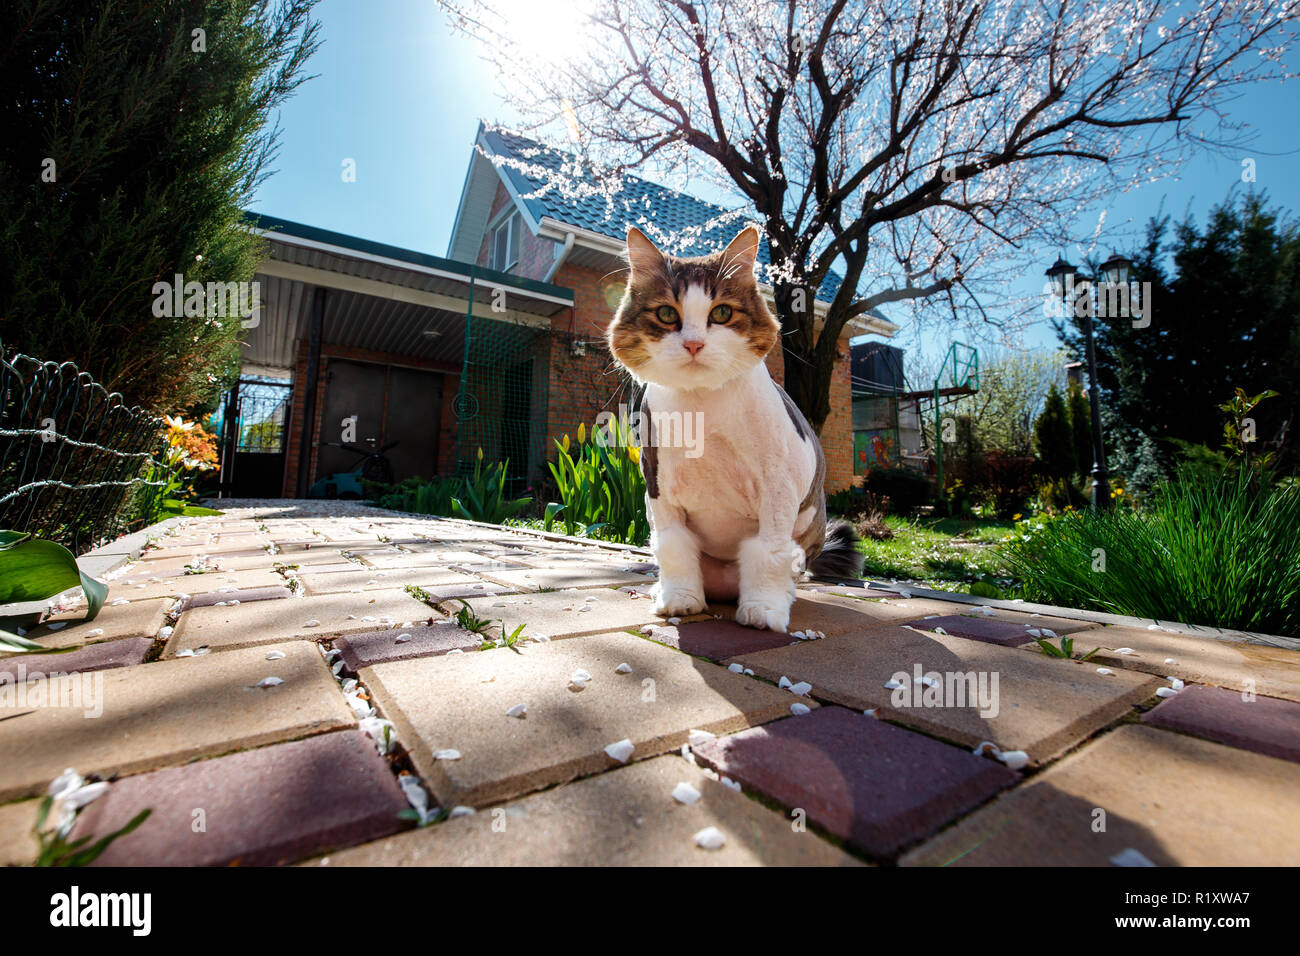 Norwegian Forest Cat walks through the courtyard of the house in the garden which is covered with petals of a blossoming tree apricot. Stock Photo